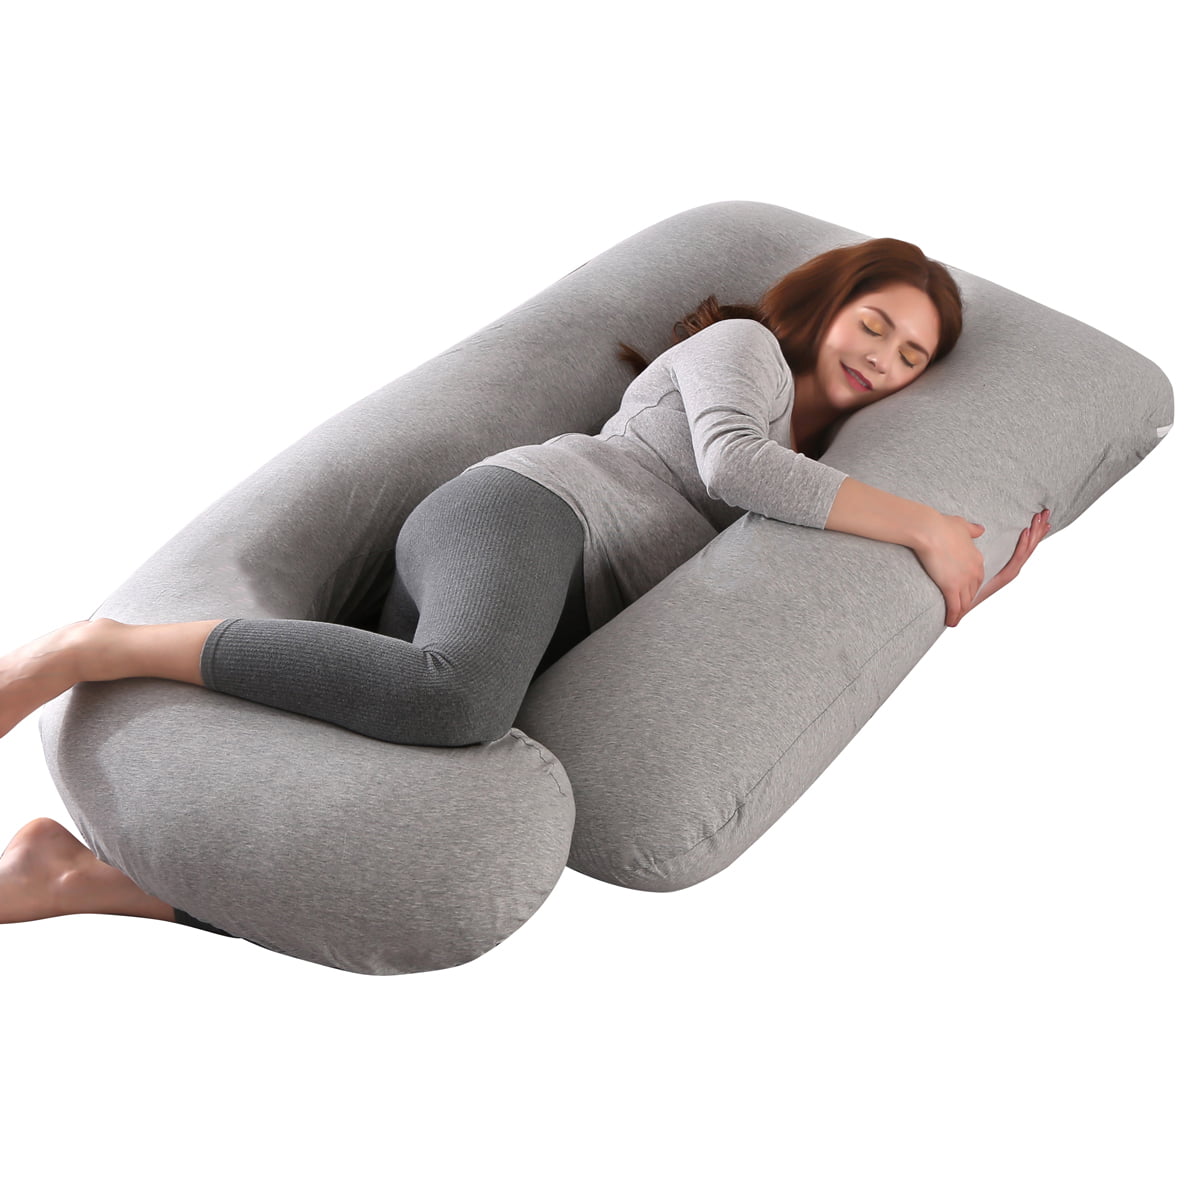 Long Light Grey Wrap Around Style Body Hugging Pregnancy Pillow Extra Large 